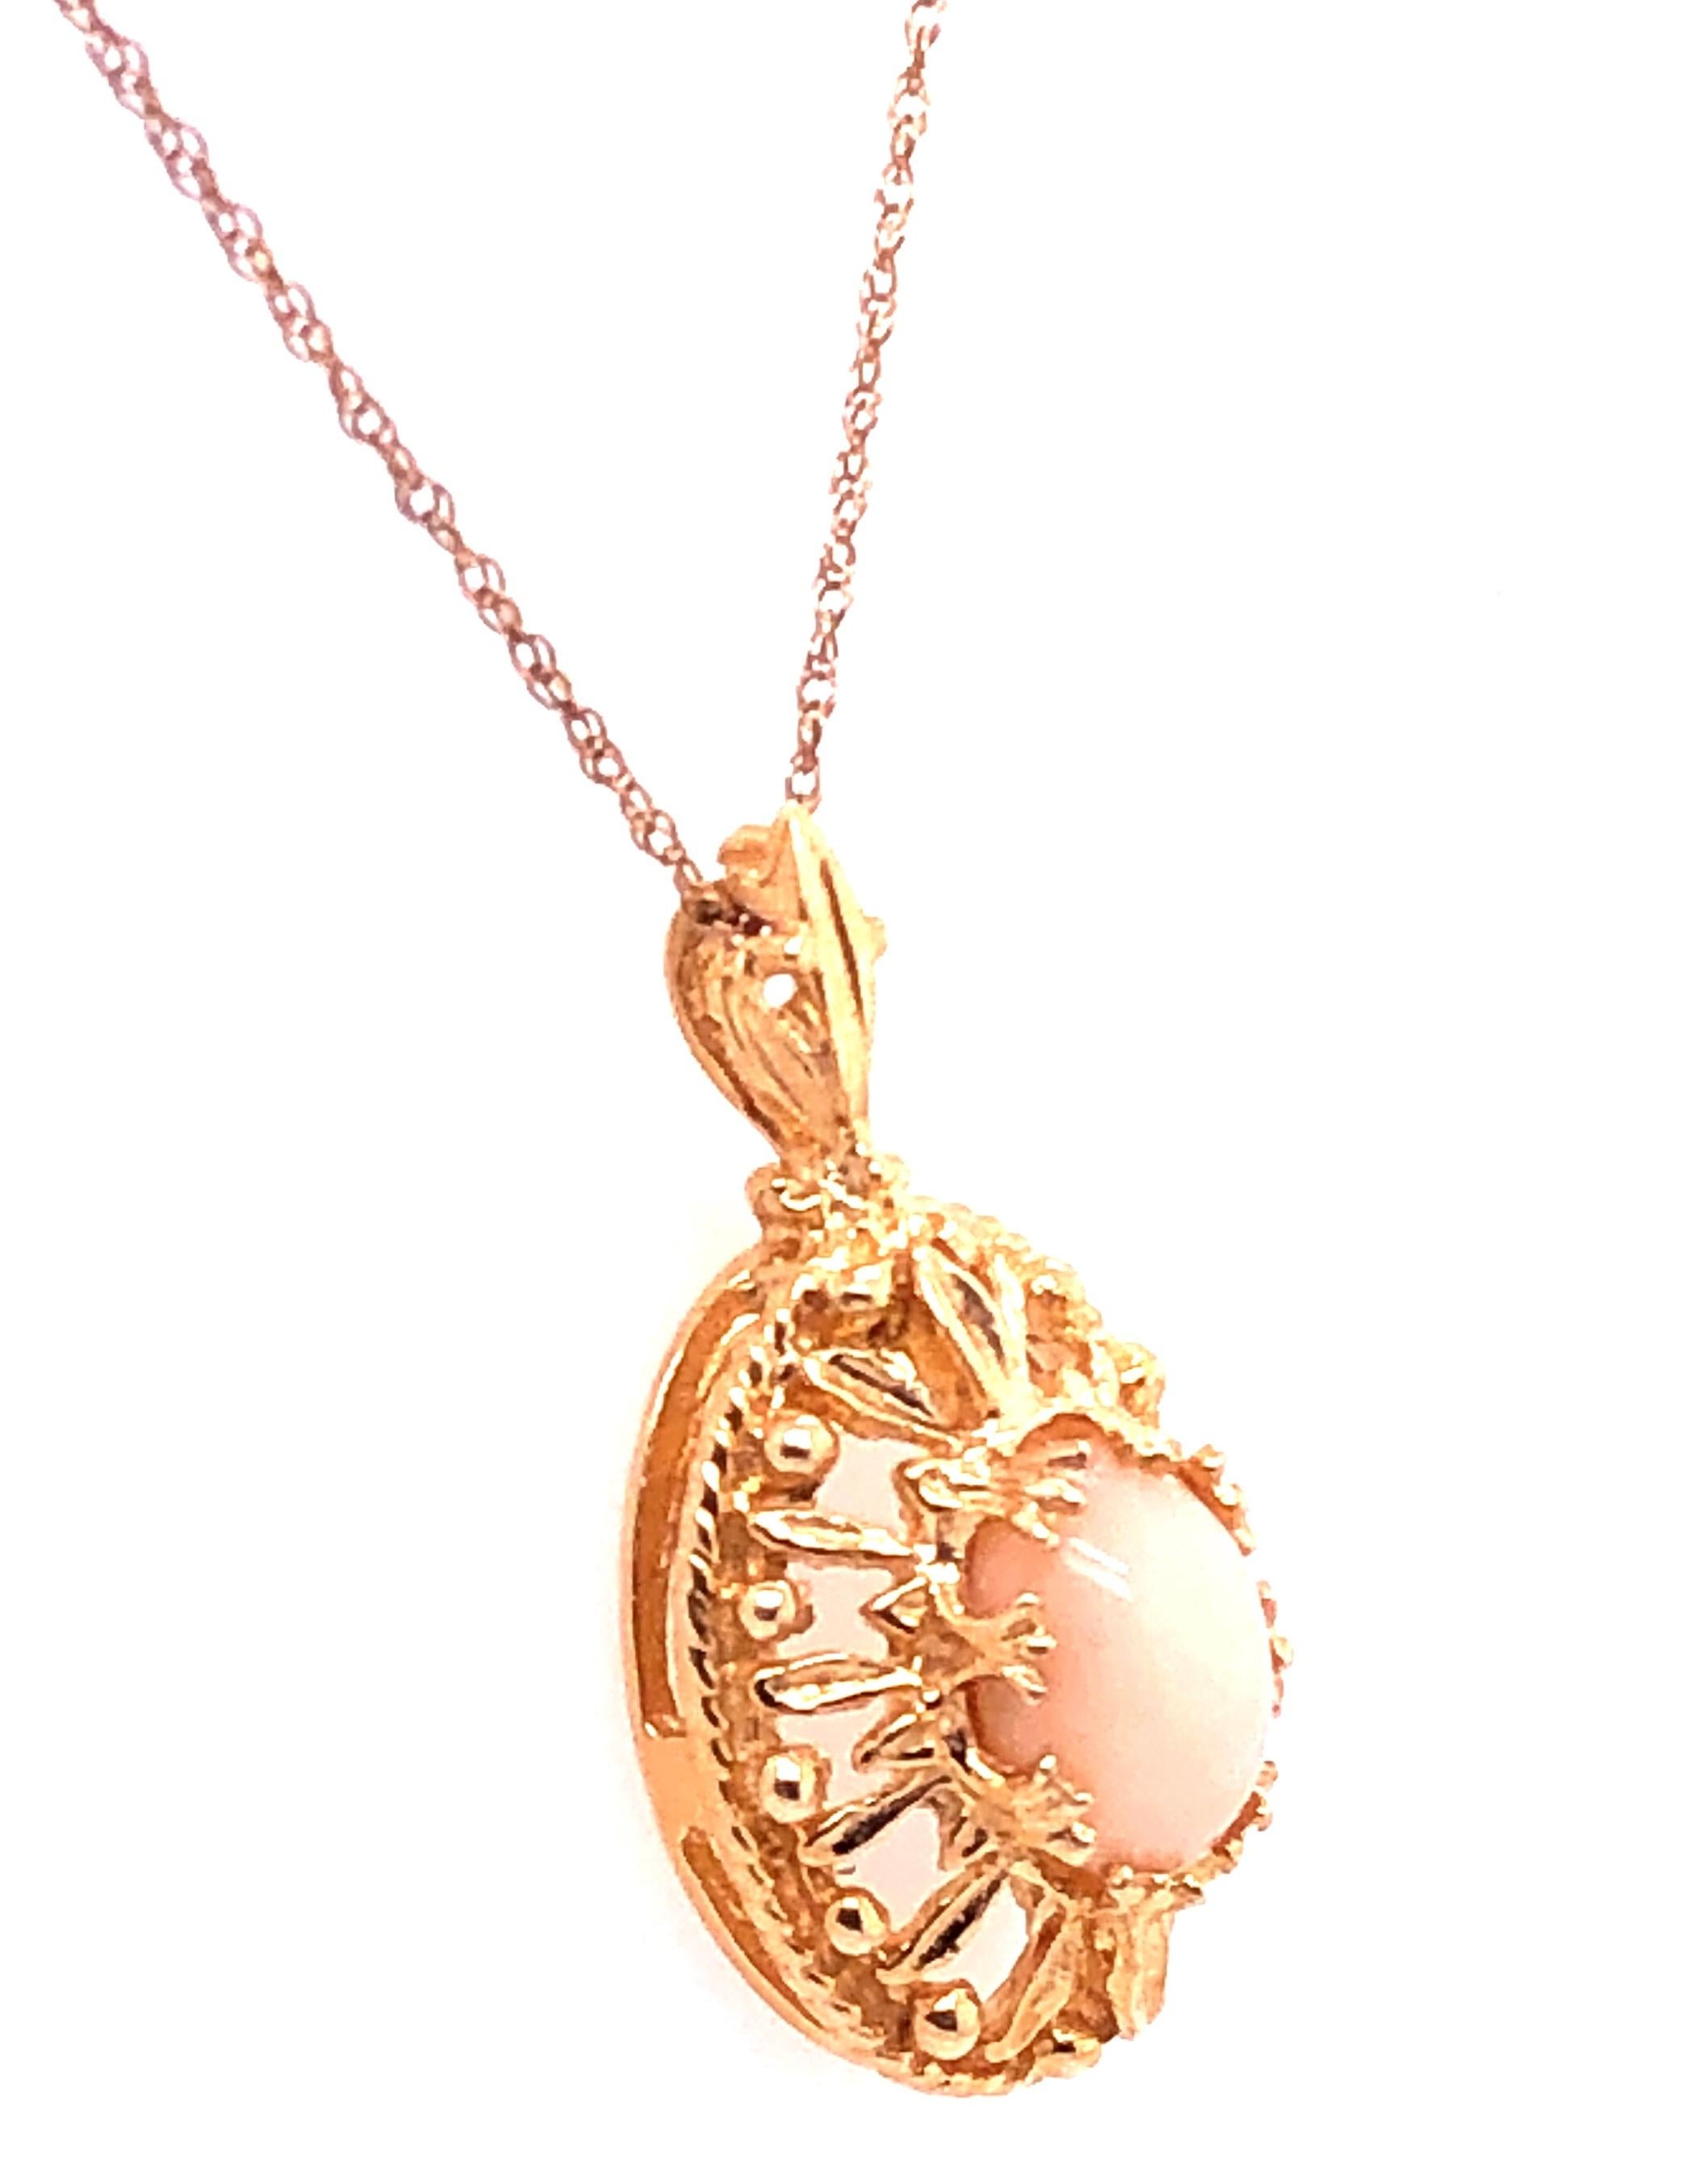 Contemporary 14 Karat Yellow Gold Necklace with Pendant For Sale